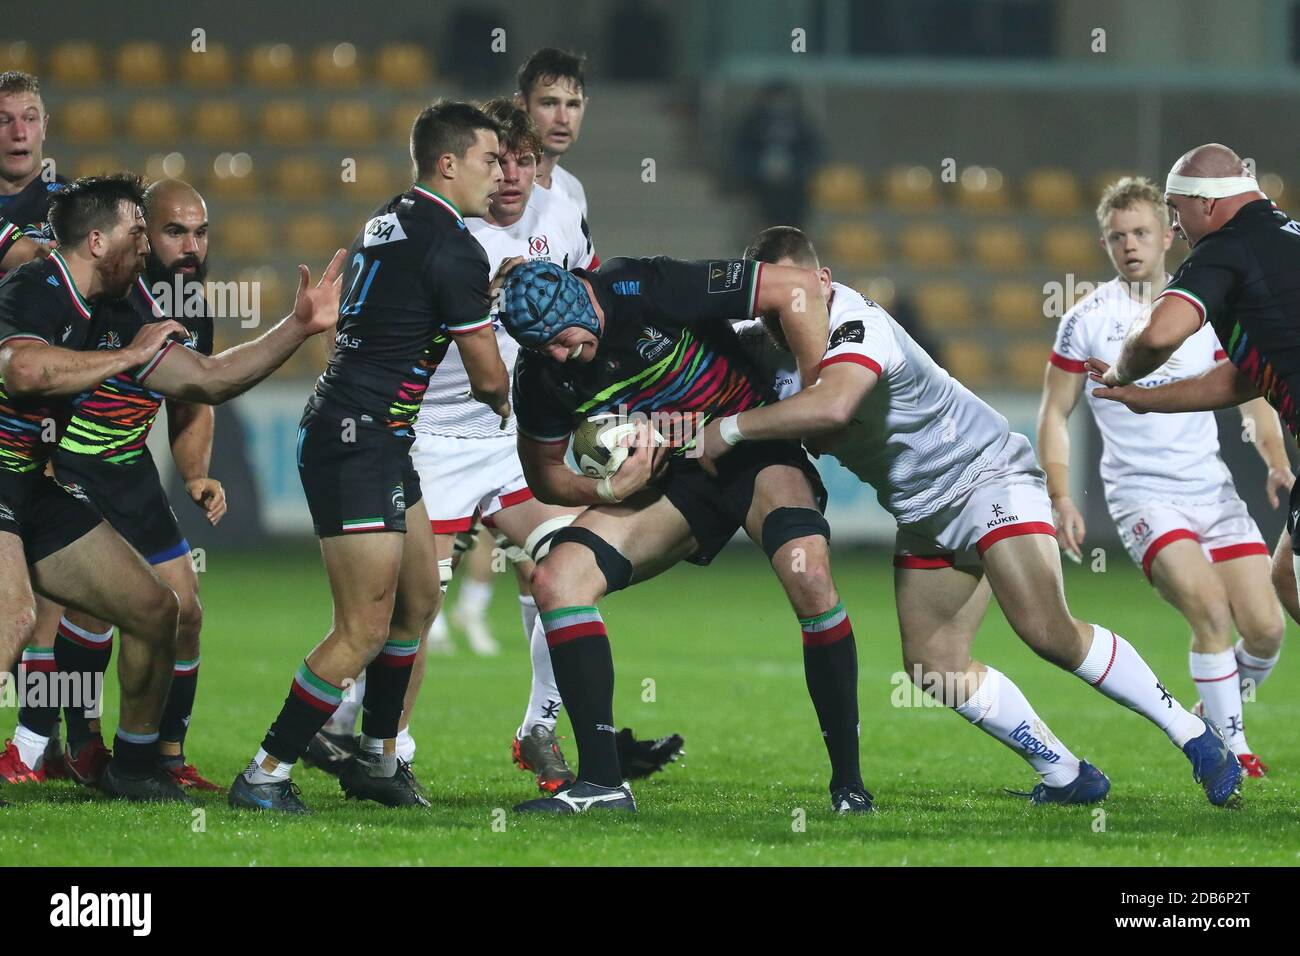 Parma, Italy. 16th Nov, 2020. parma, Italy, Sergio Lanfranchi stadium, 16 Nov 2020, Ian Nagle during Zebre Rugby vs Ulster Rugby - Rugby Guinness Pro 14 match - Credit: LM/Massimiliano Carnabuci Credit: Massimiliano Carnabuci/LPS/ZUMA Wire/Alamy Live News Stock Photo